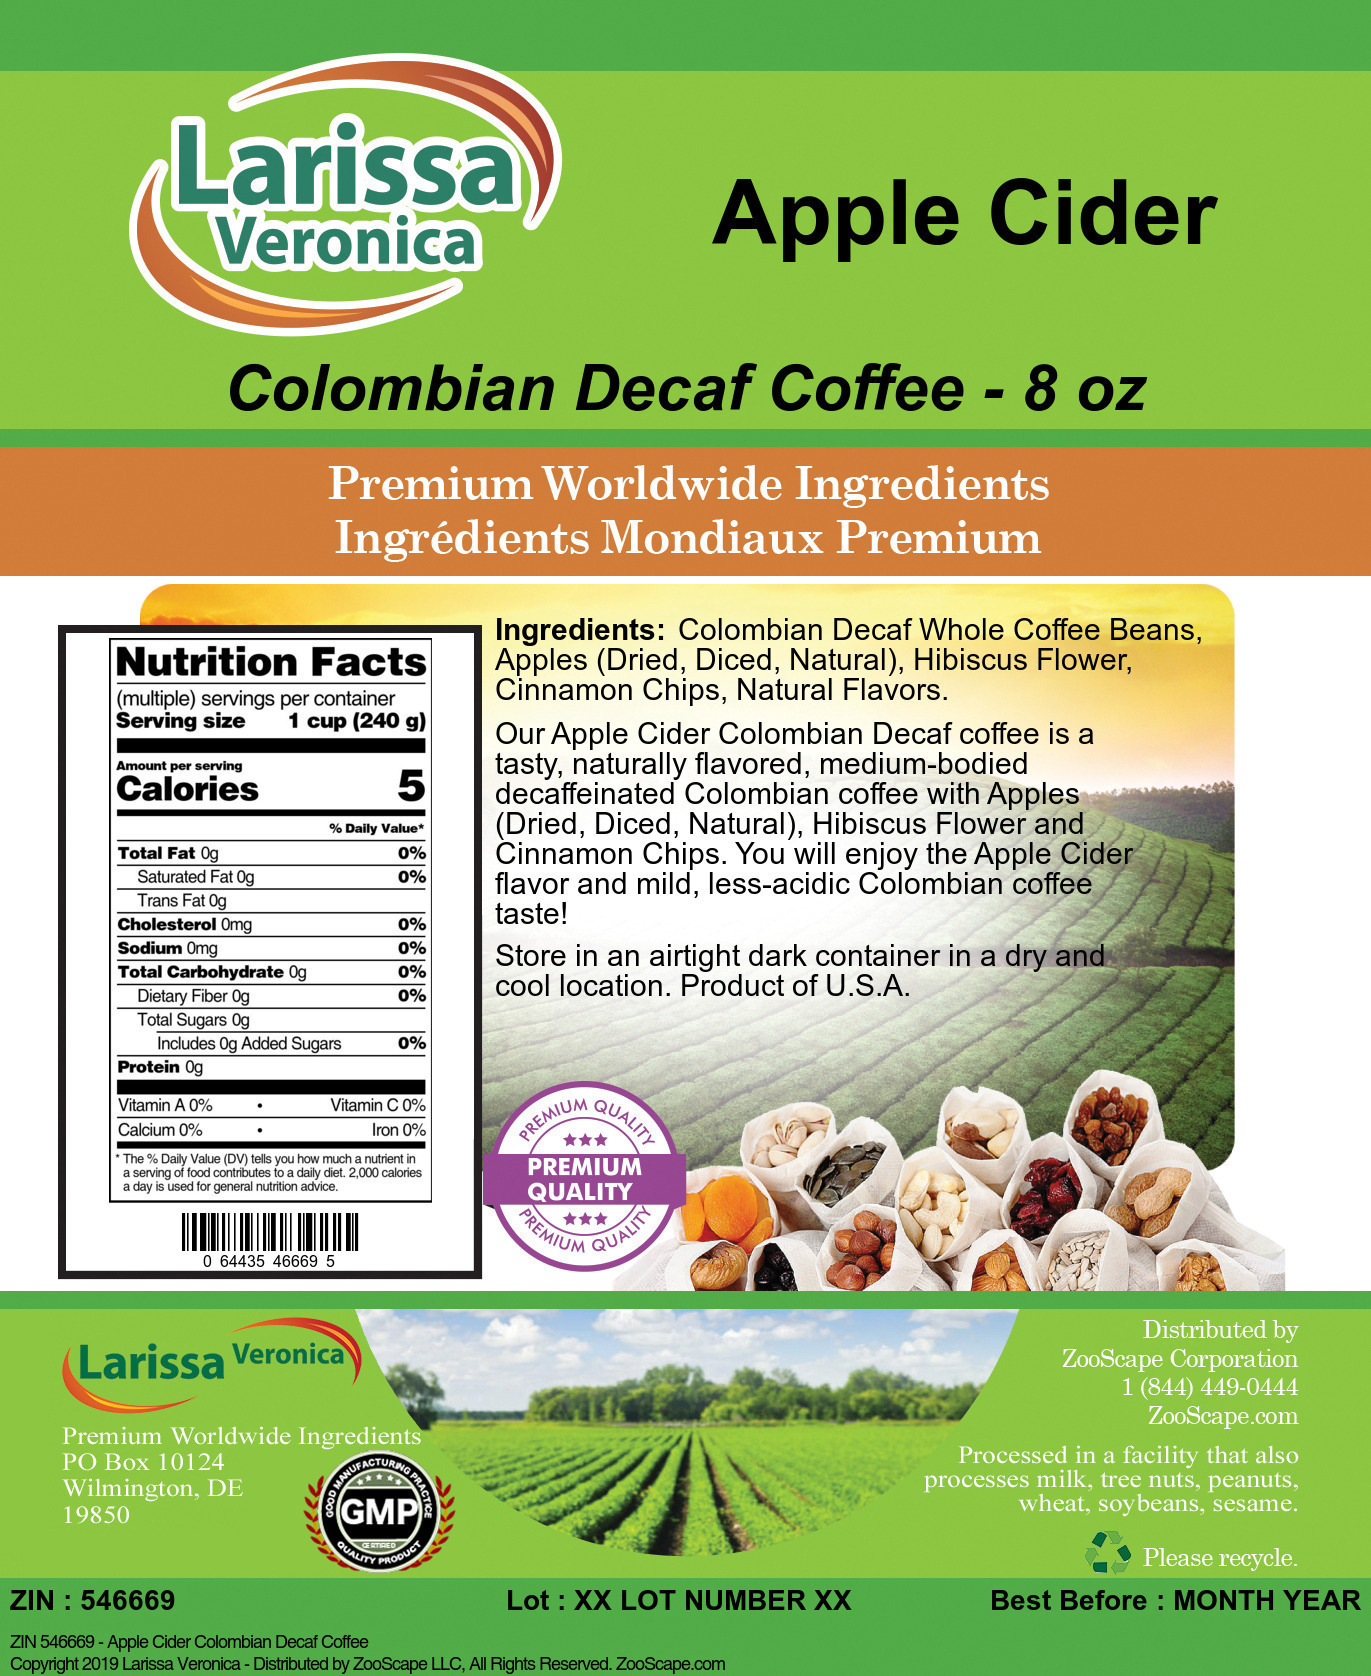 Apple Cider Colombian Decaf Coffee - Label